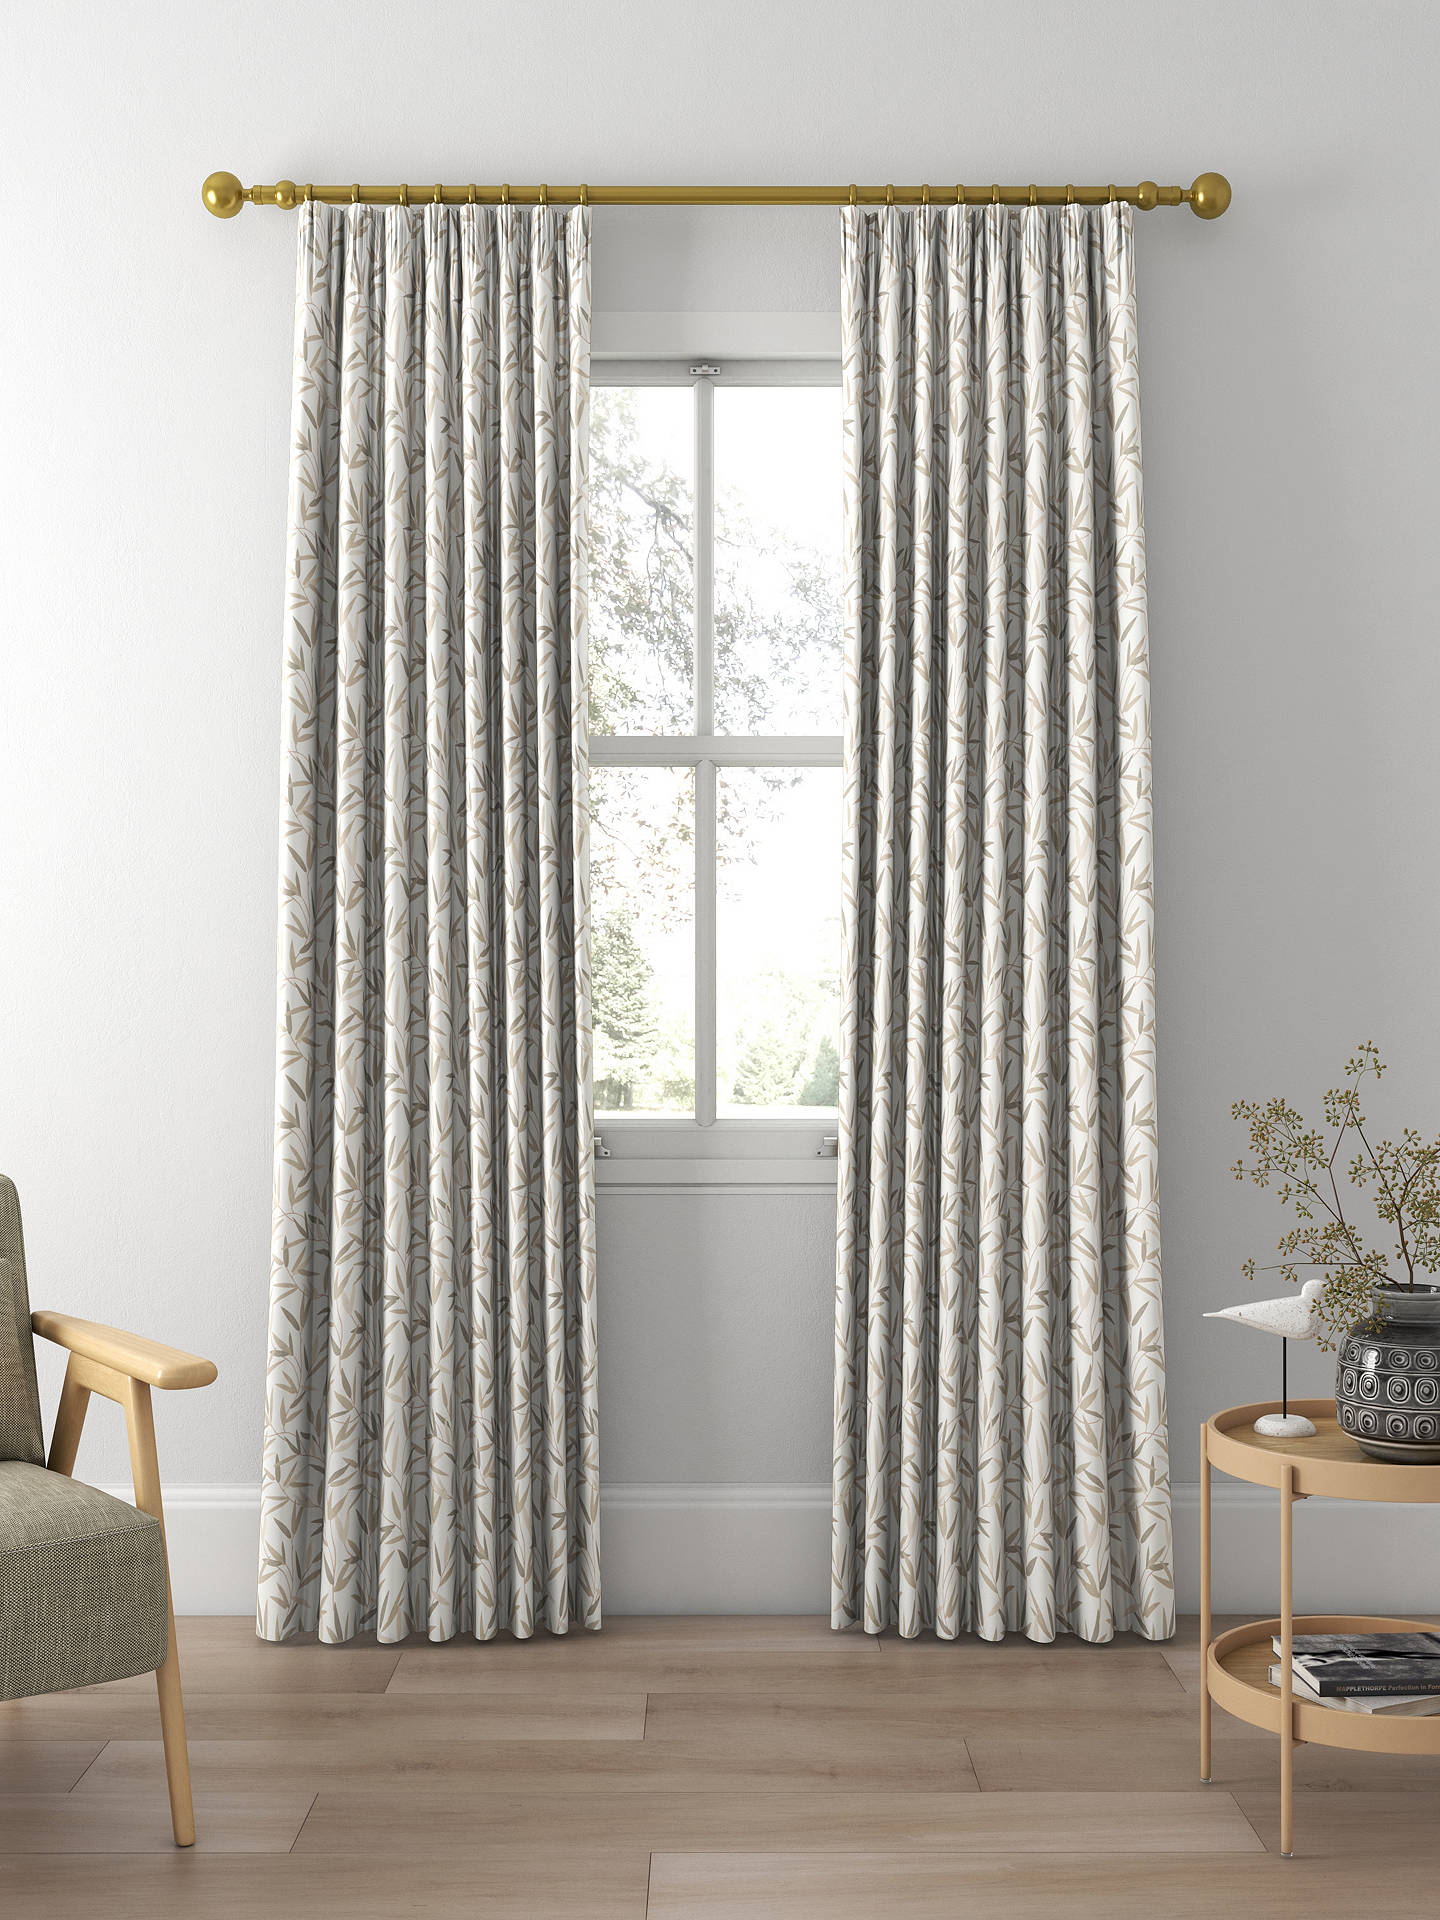 Laura Ashley Willow Leaf Made to Measure Curtains, Natural